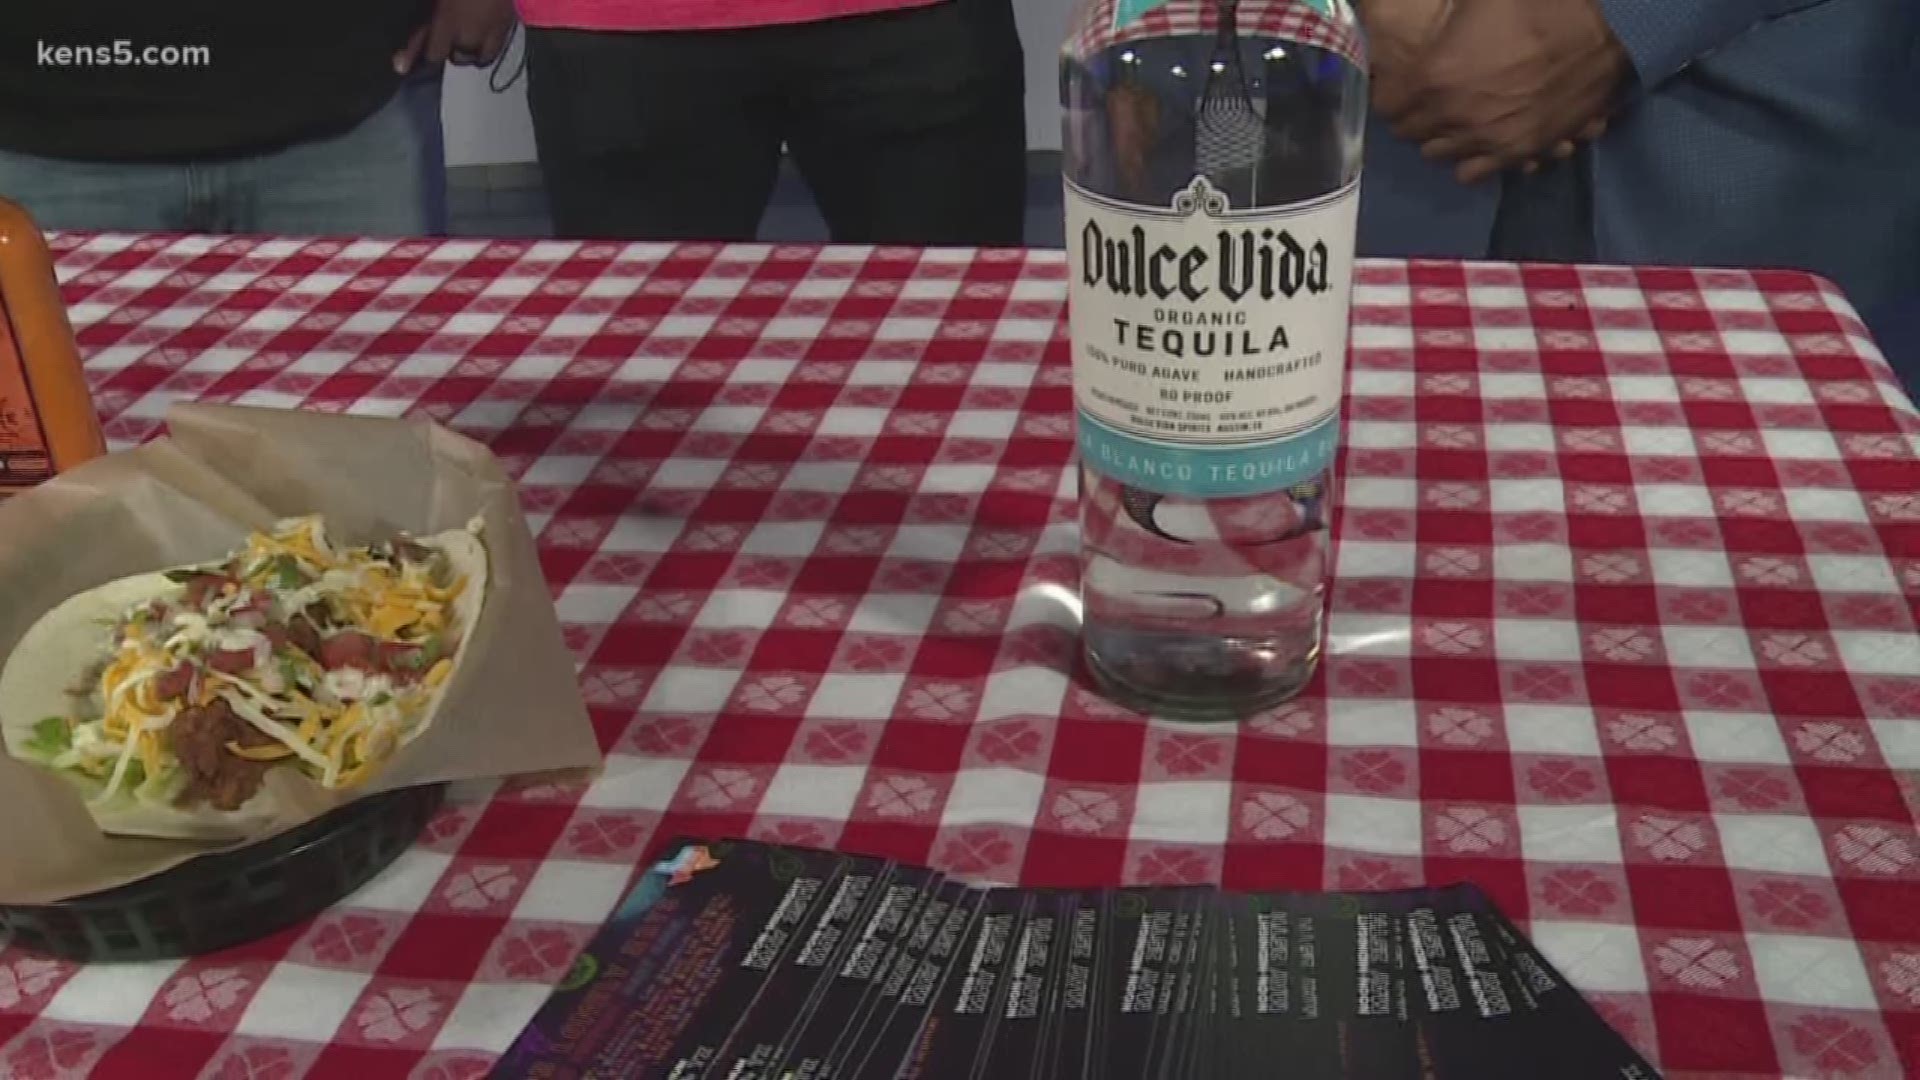 The Texas Taco, Tequila and Music Festival combines the very best eats, drinks and sounds of the Lone Star State.